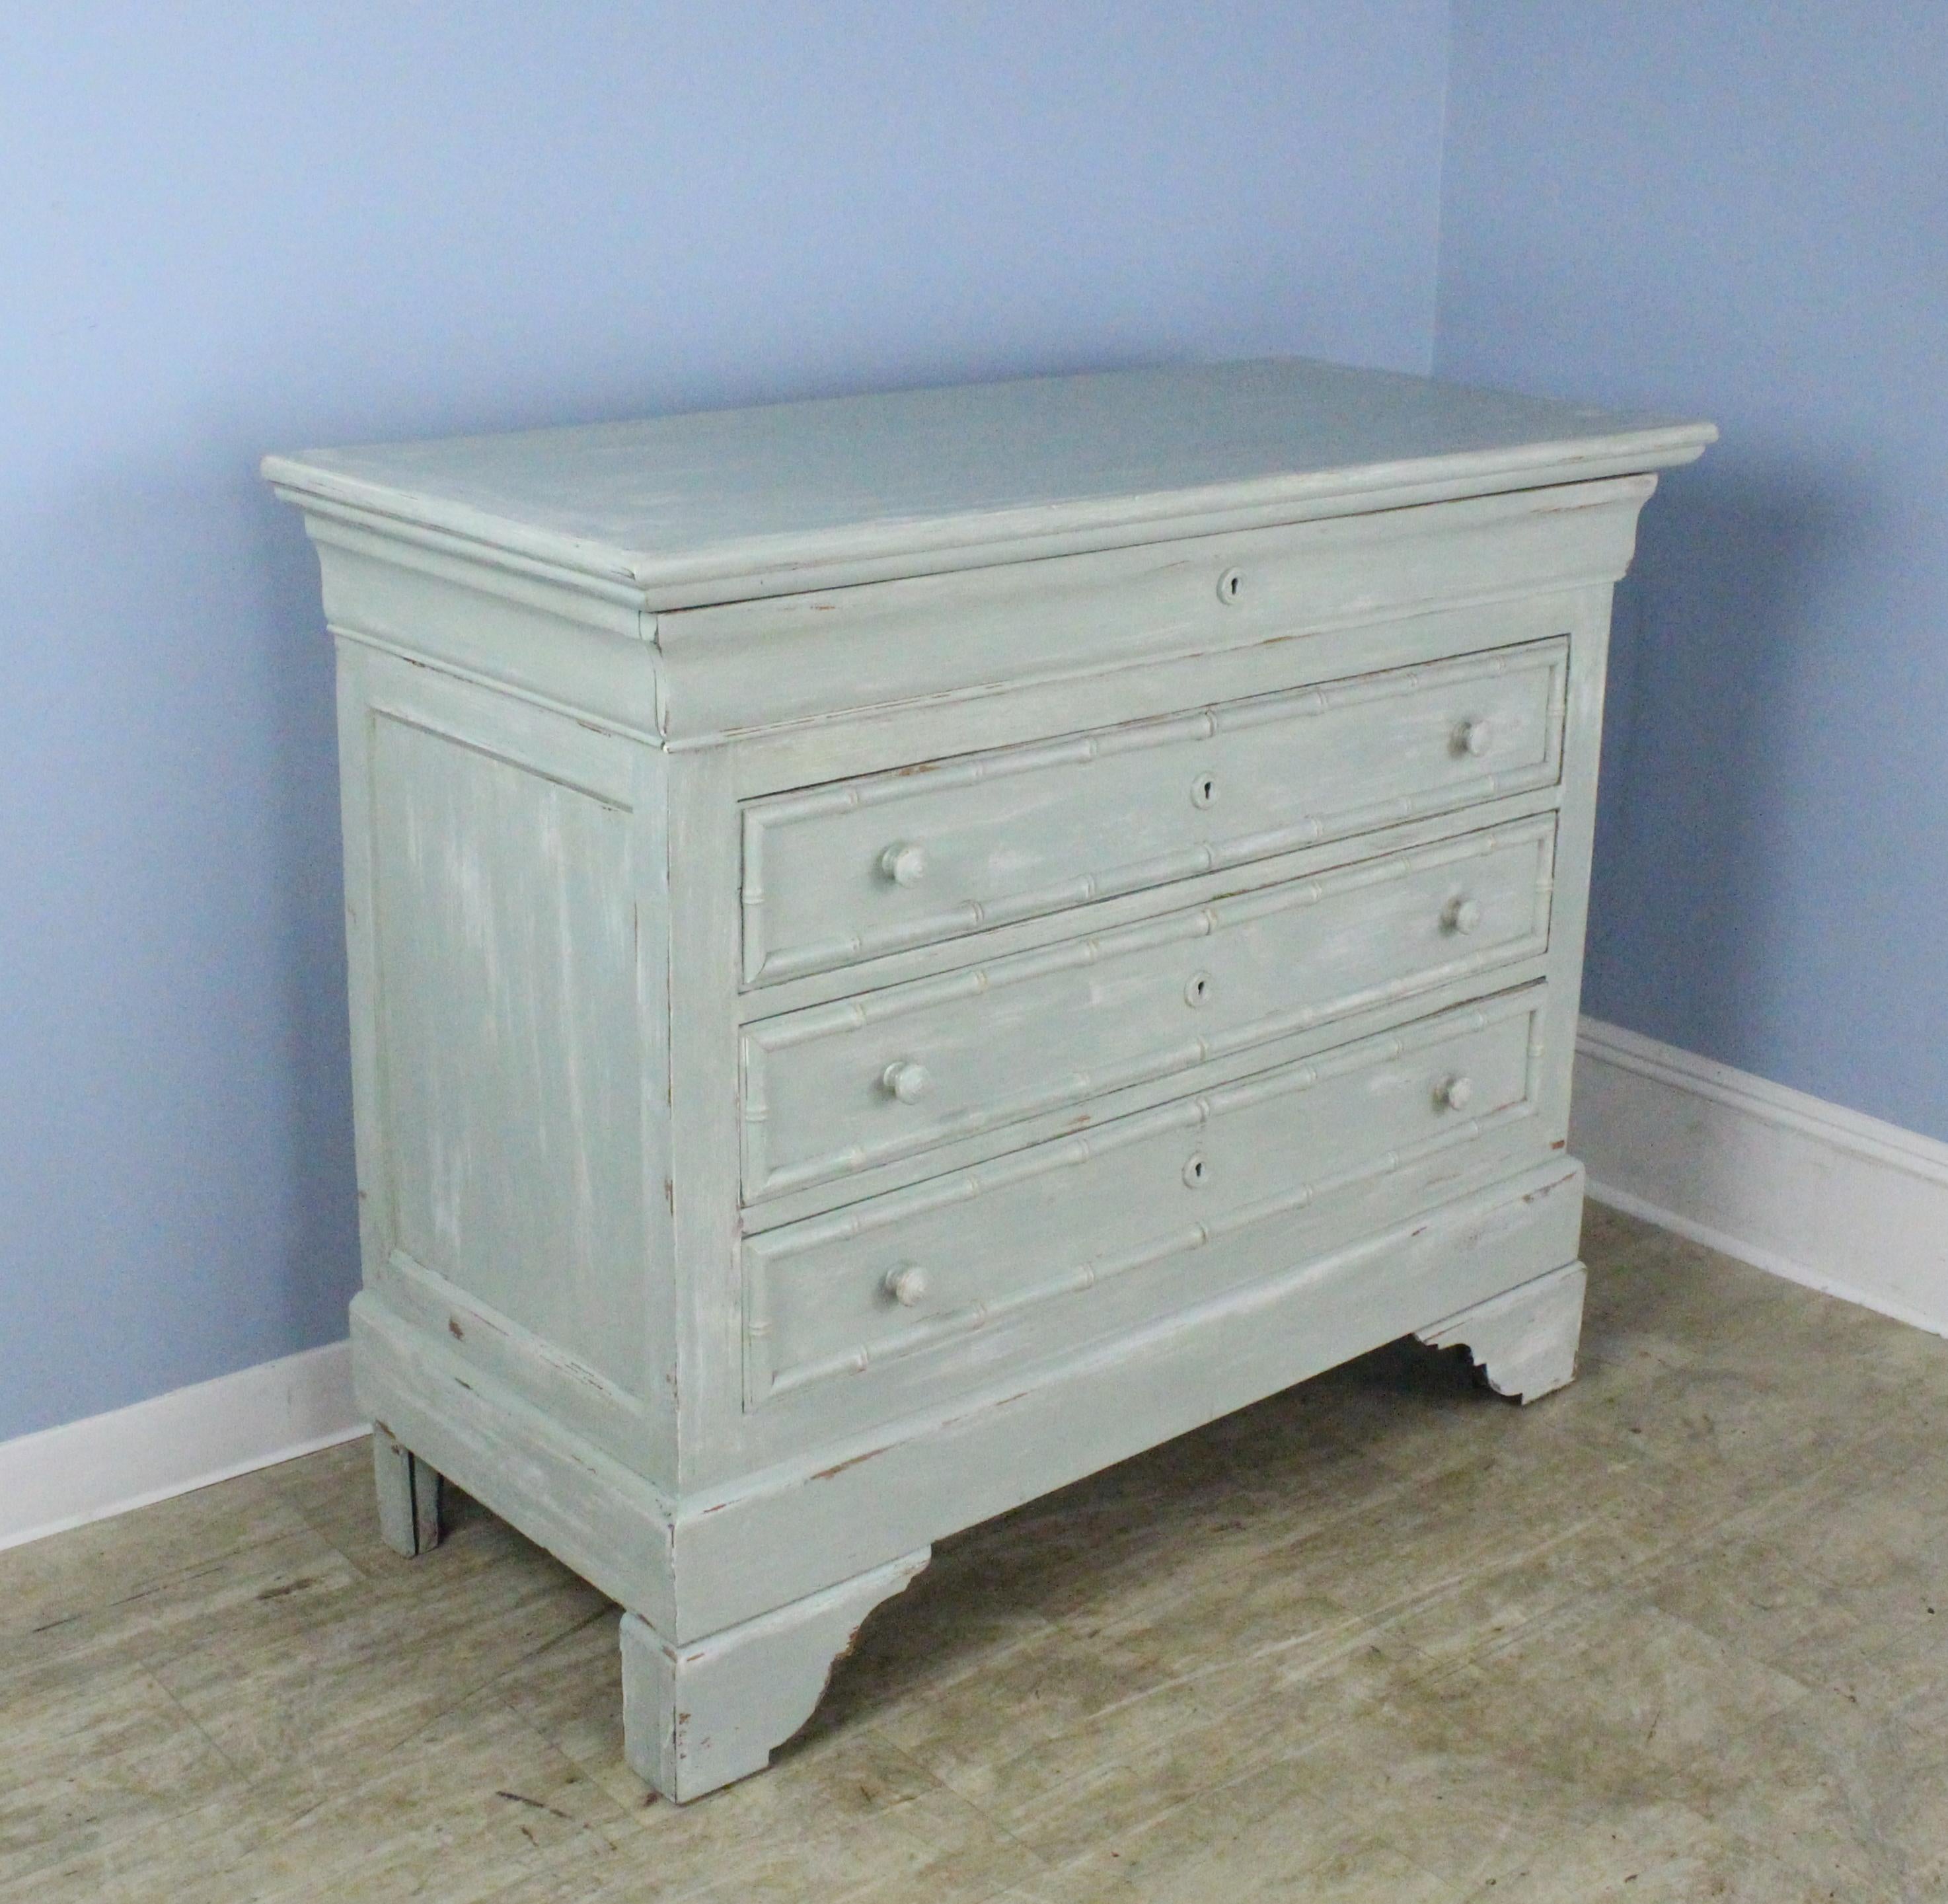 A French pine faux bamboo chest of drawers in the Louis Philippe style, newly painted and faux distressed in a fanciful blue green. Drawers run nicely, and are still lined with the original paper. Heavy and sturdy.